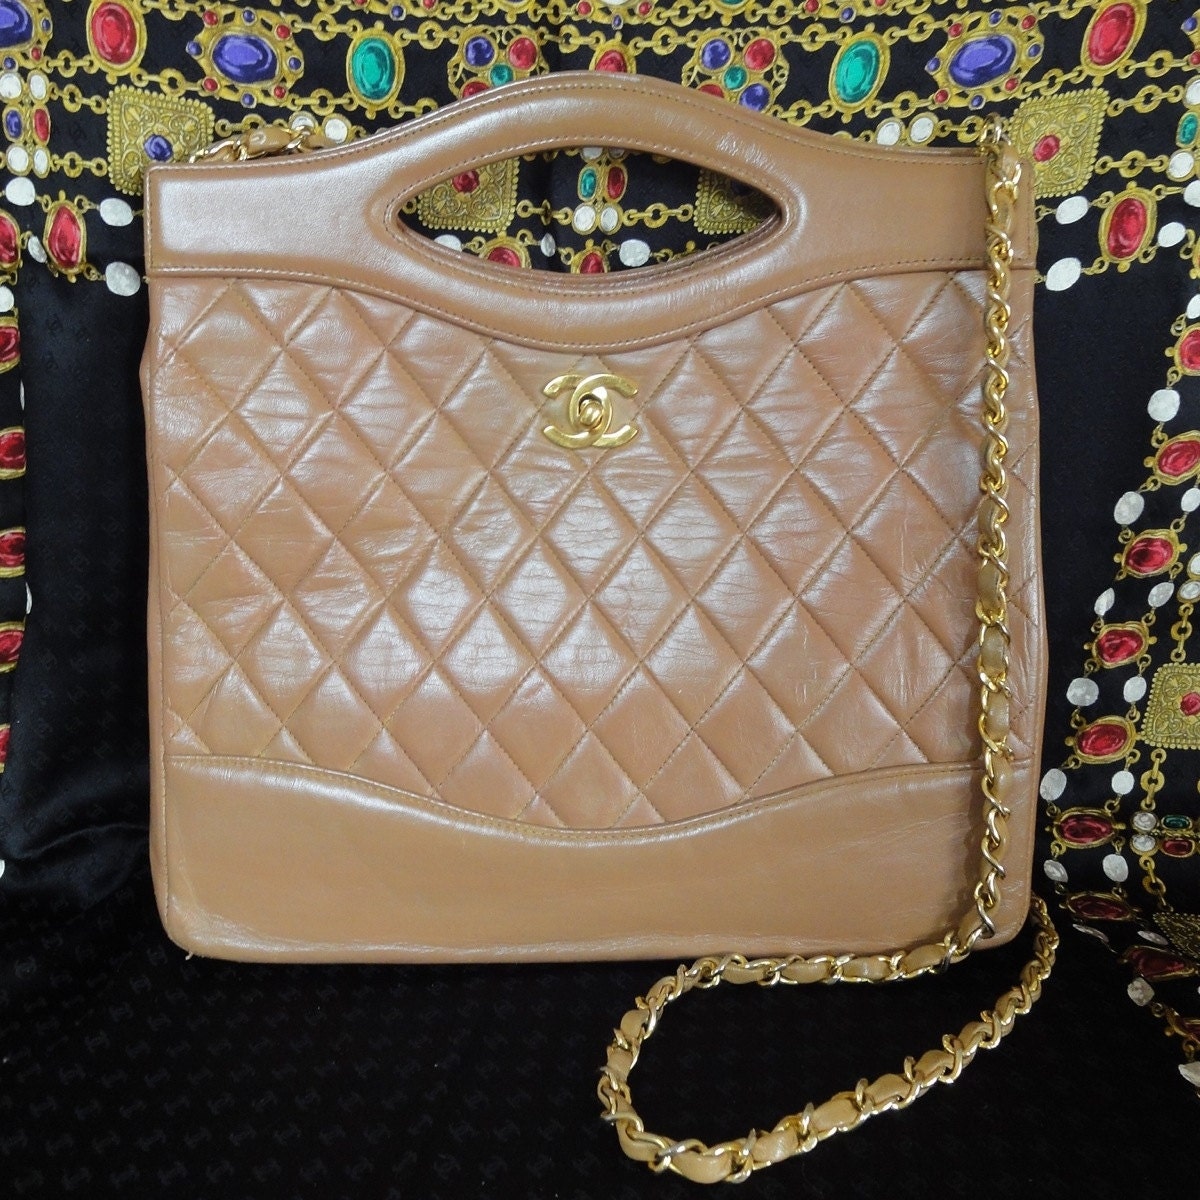 Chanel Purse Reviewed | IQS Executive